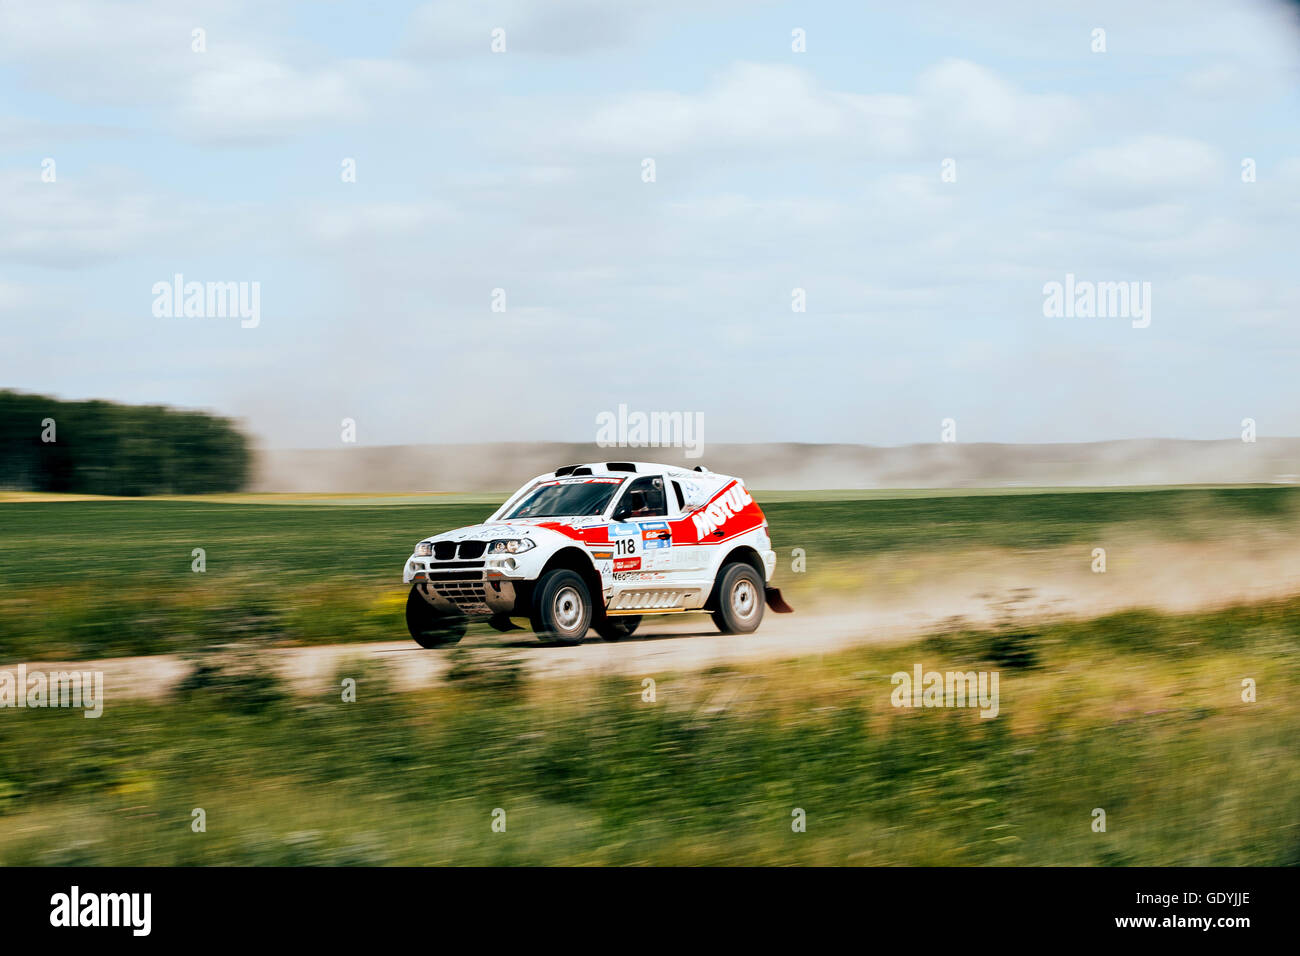 rally car rides at high speed on road during Silk way rally Stock Photo